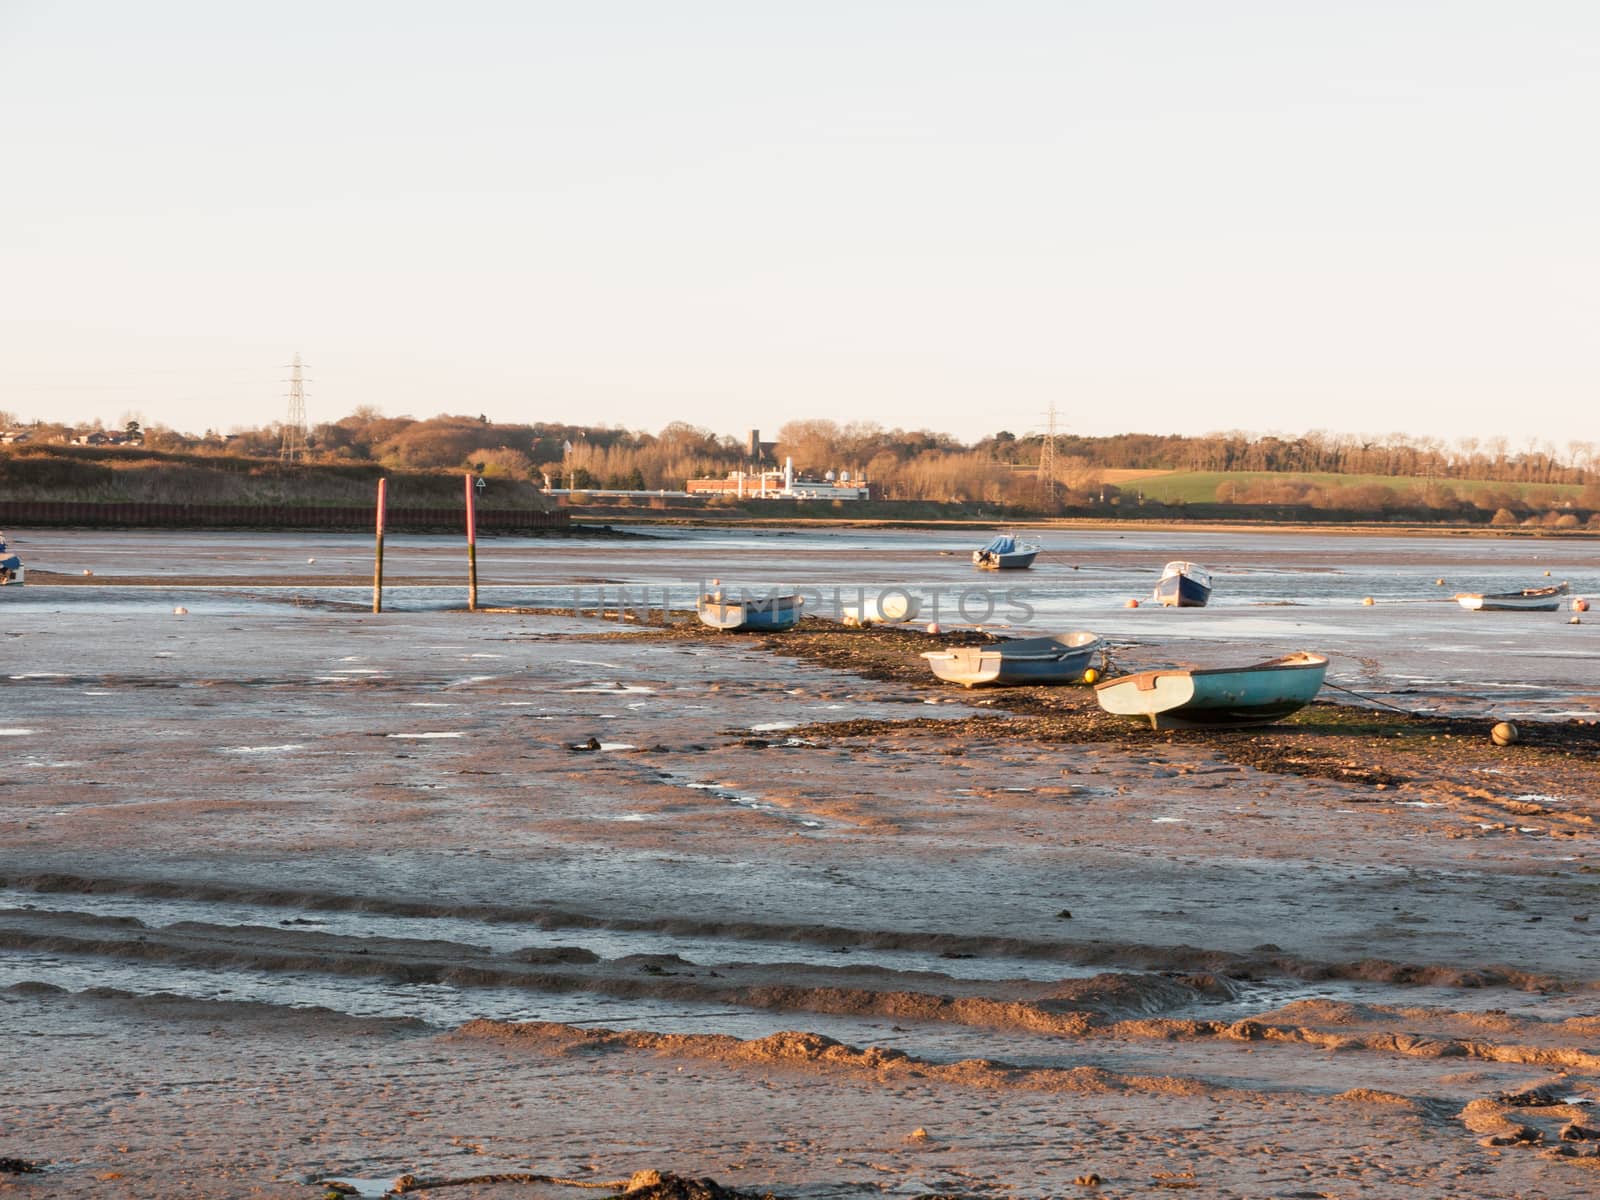 A wonderful shot of the river and its bank with the tide out on a clear day with boats